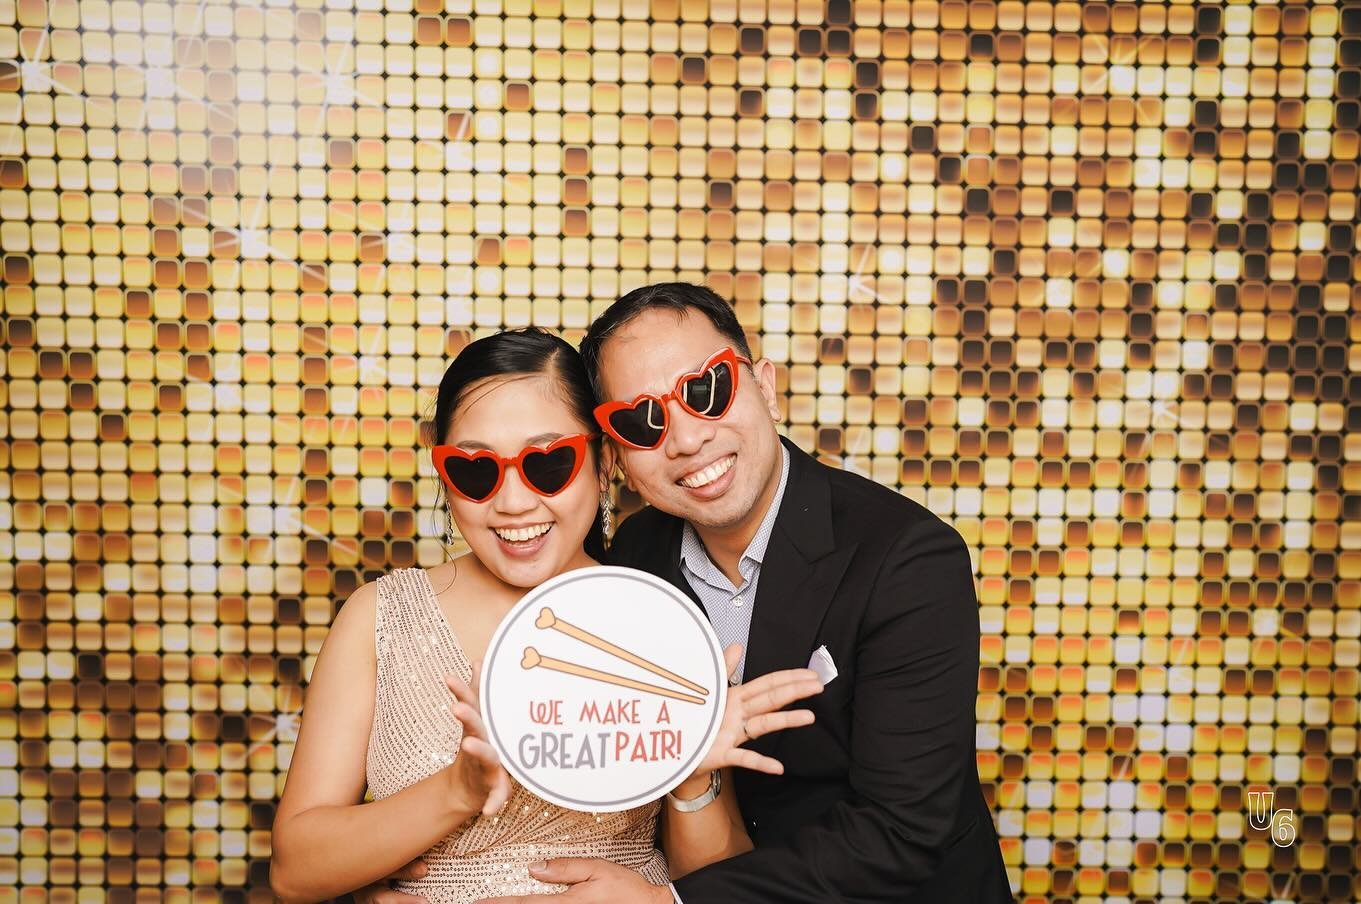 Some fun and quirky snaps from Faye&rsquo;s fabulous event! ✨

Our cute new prop signages were a hit at last night&rsquo;s event! We loved seeing you strike a pose with it! 

Photobooth used: 4hrs Classic Booth
Backdrop: Gold Shimmer

Book us for you